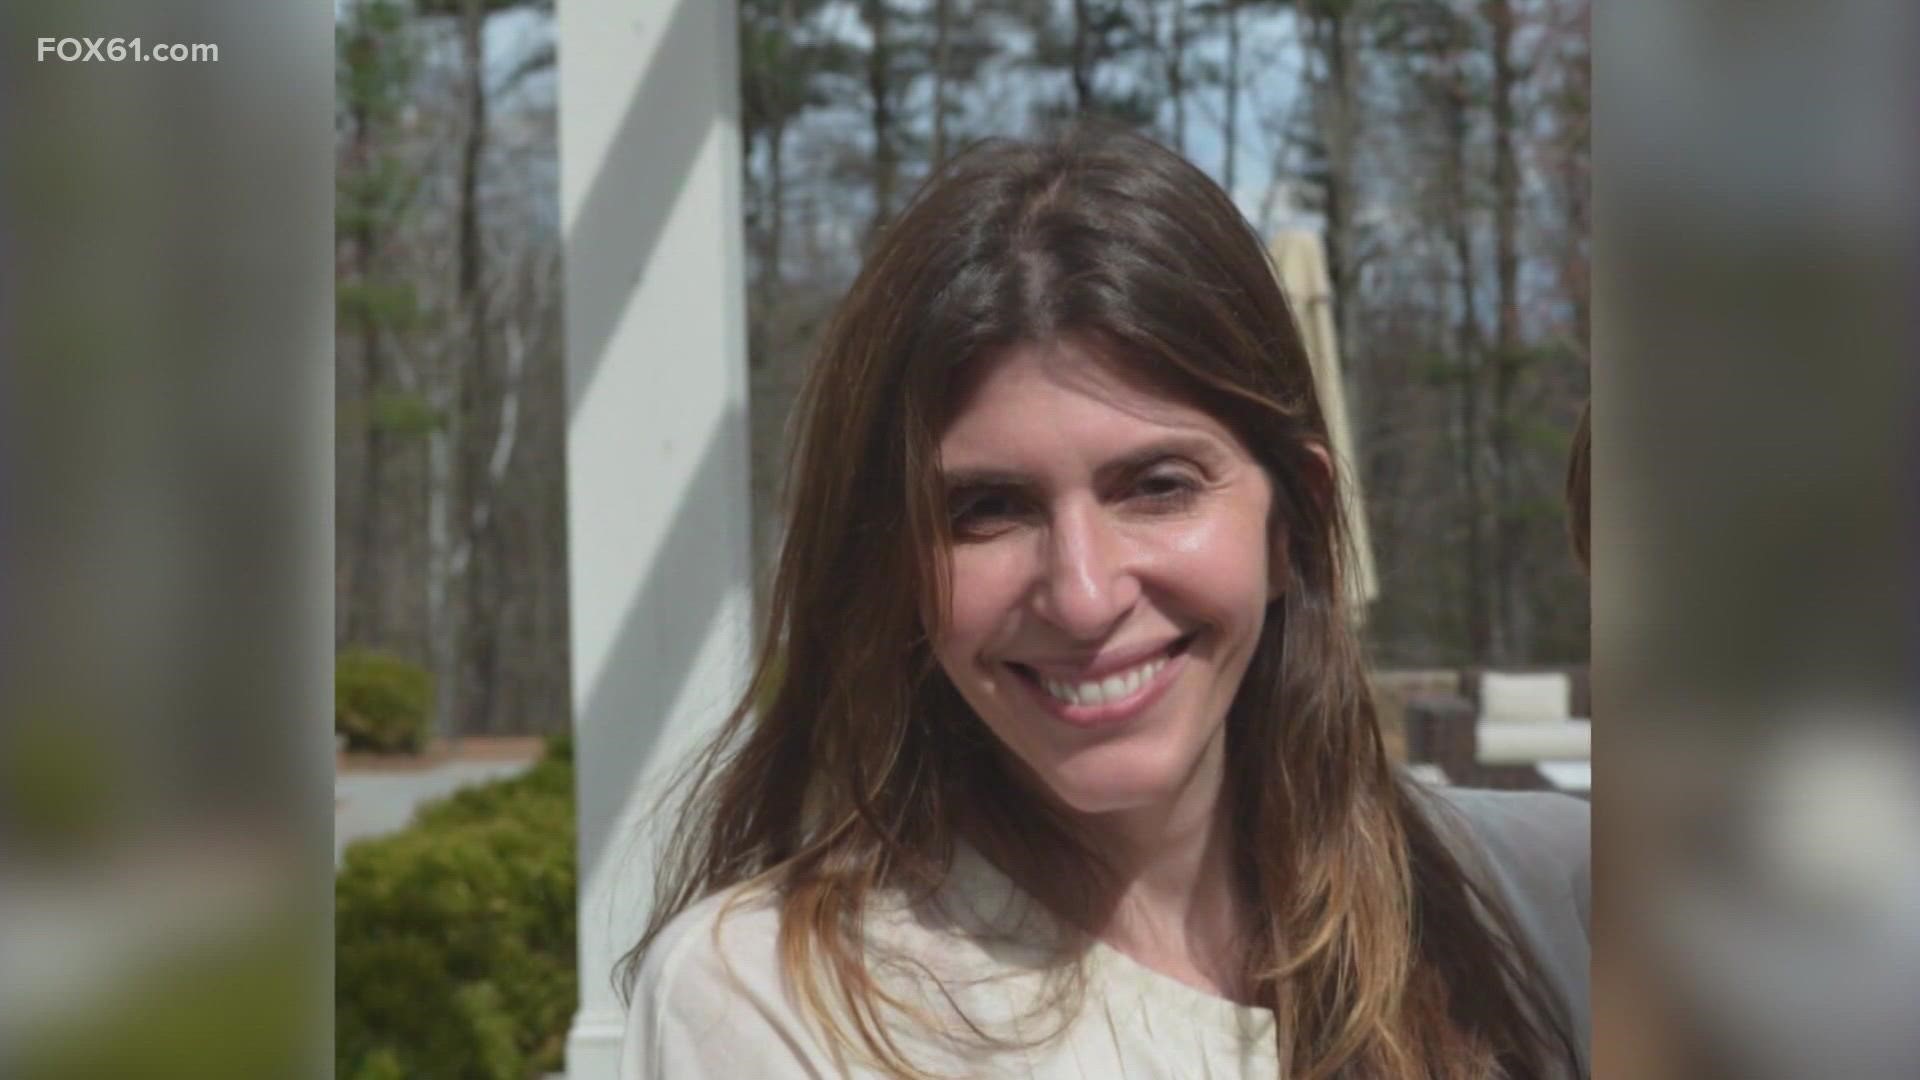 The mystery surrounding Jennifer Dulos continues as her disappearance hits its three-year mark. Focus also continues on protecting victims of domestic violence.